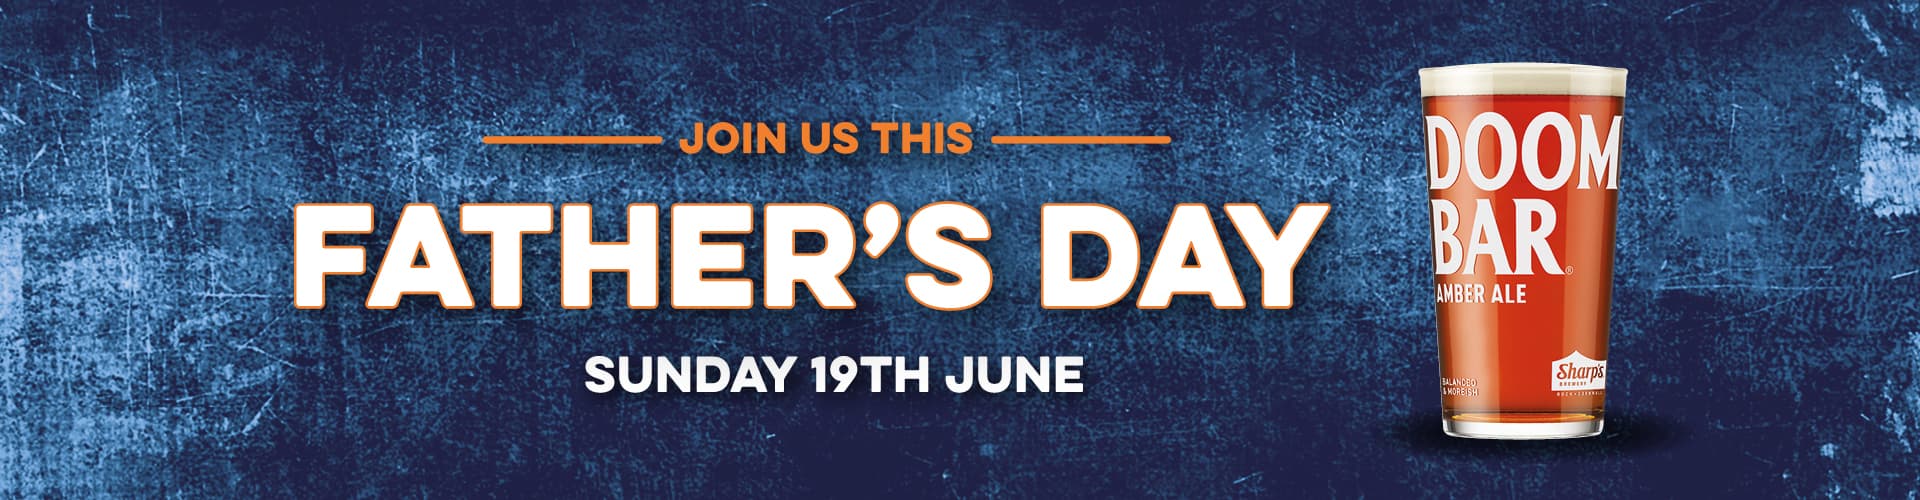 Father's Day at Oxnoble pub in Manchester